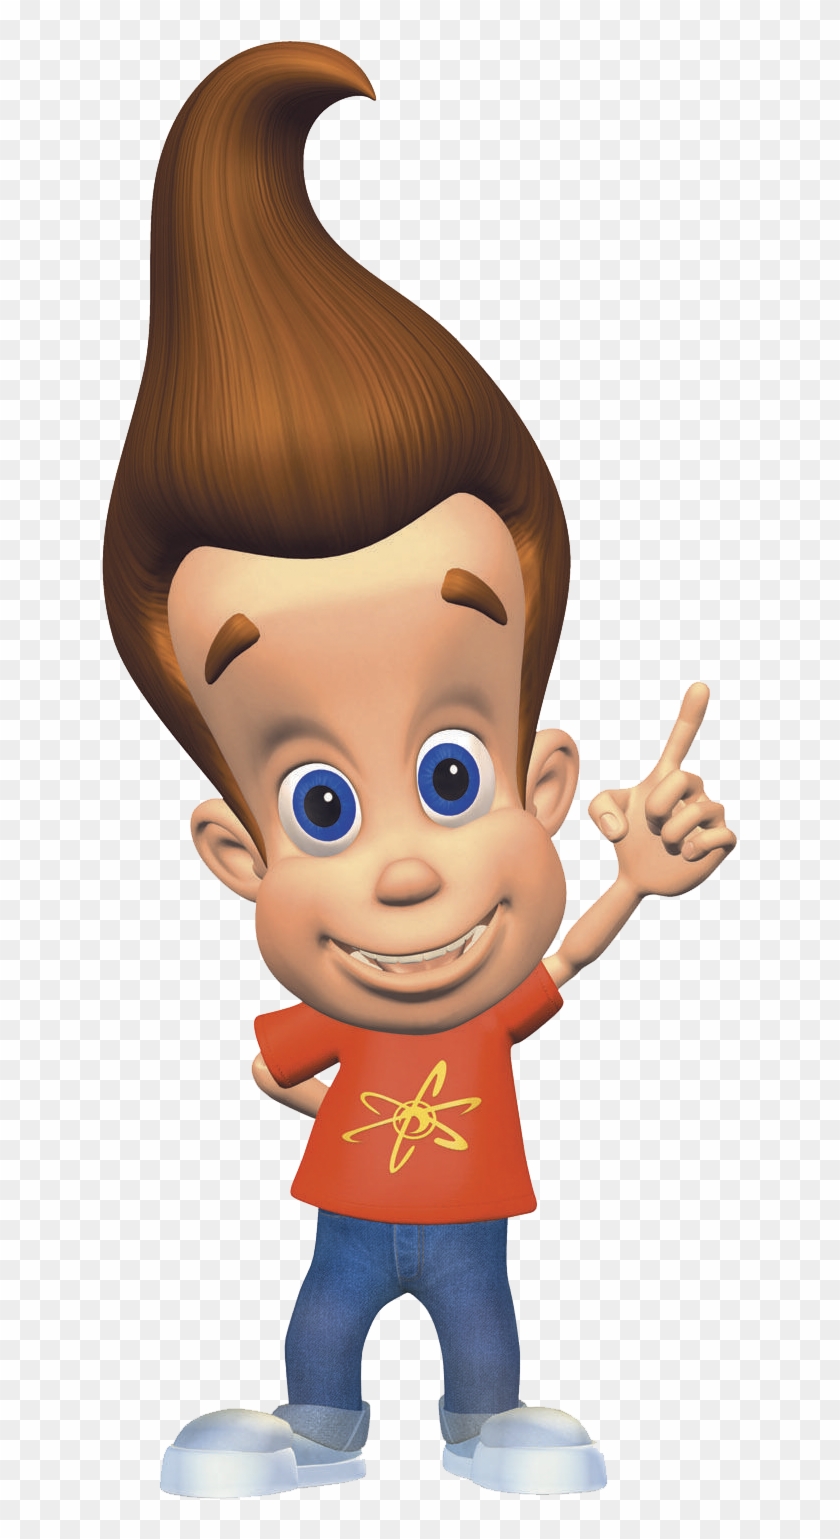 Tenth Doctor Tardis Fandom Powered By Wikia Jimmy Neutron Free Transparent Png Clipart Images Download - fire magic roblox arcane adventures wikia fandom powered